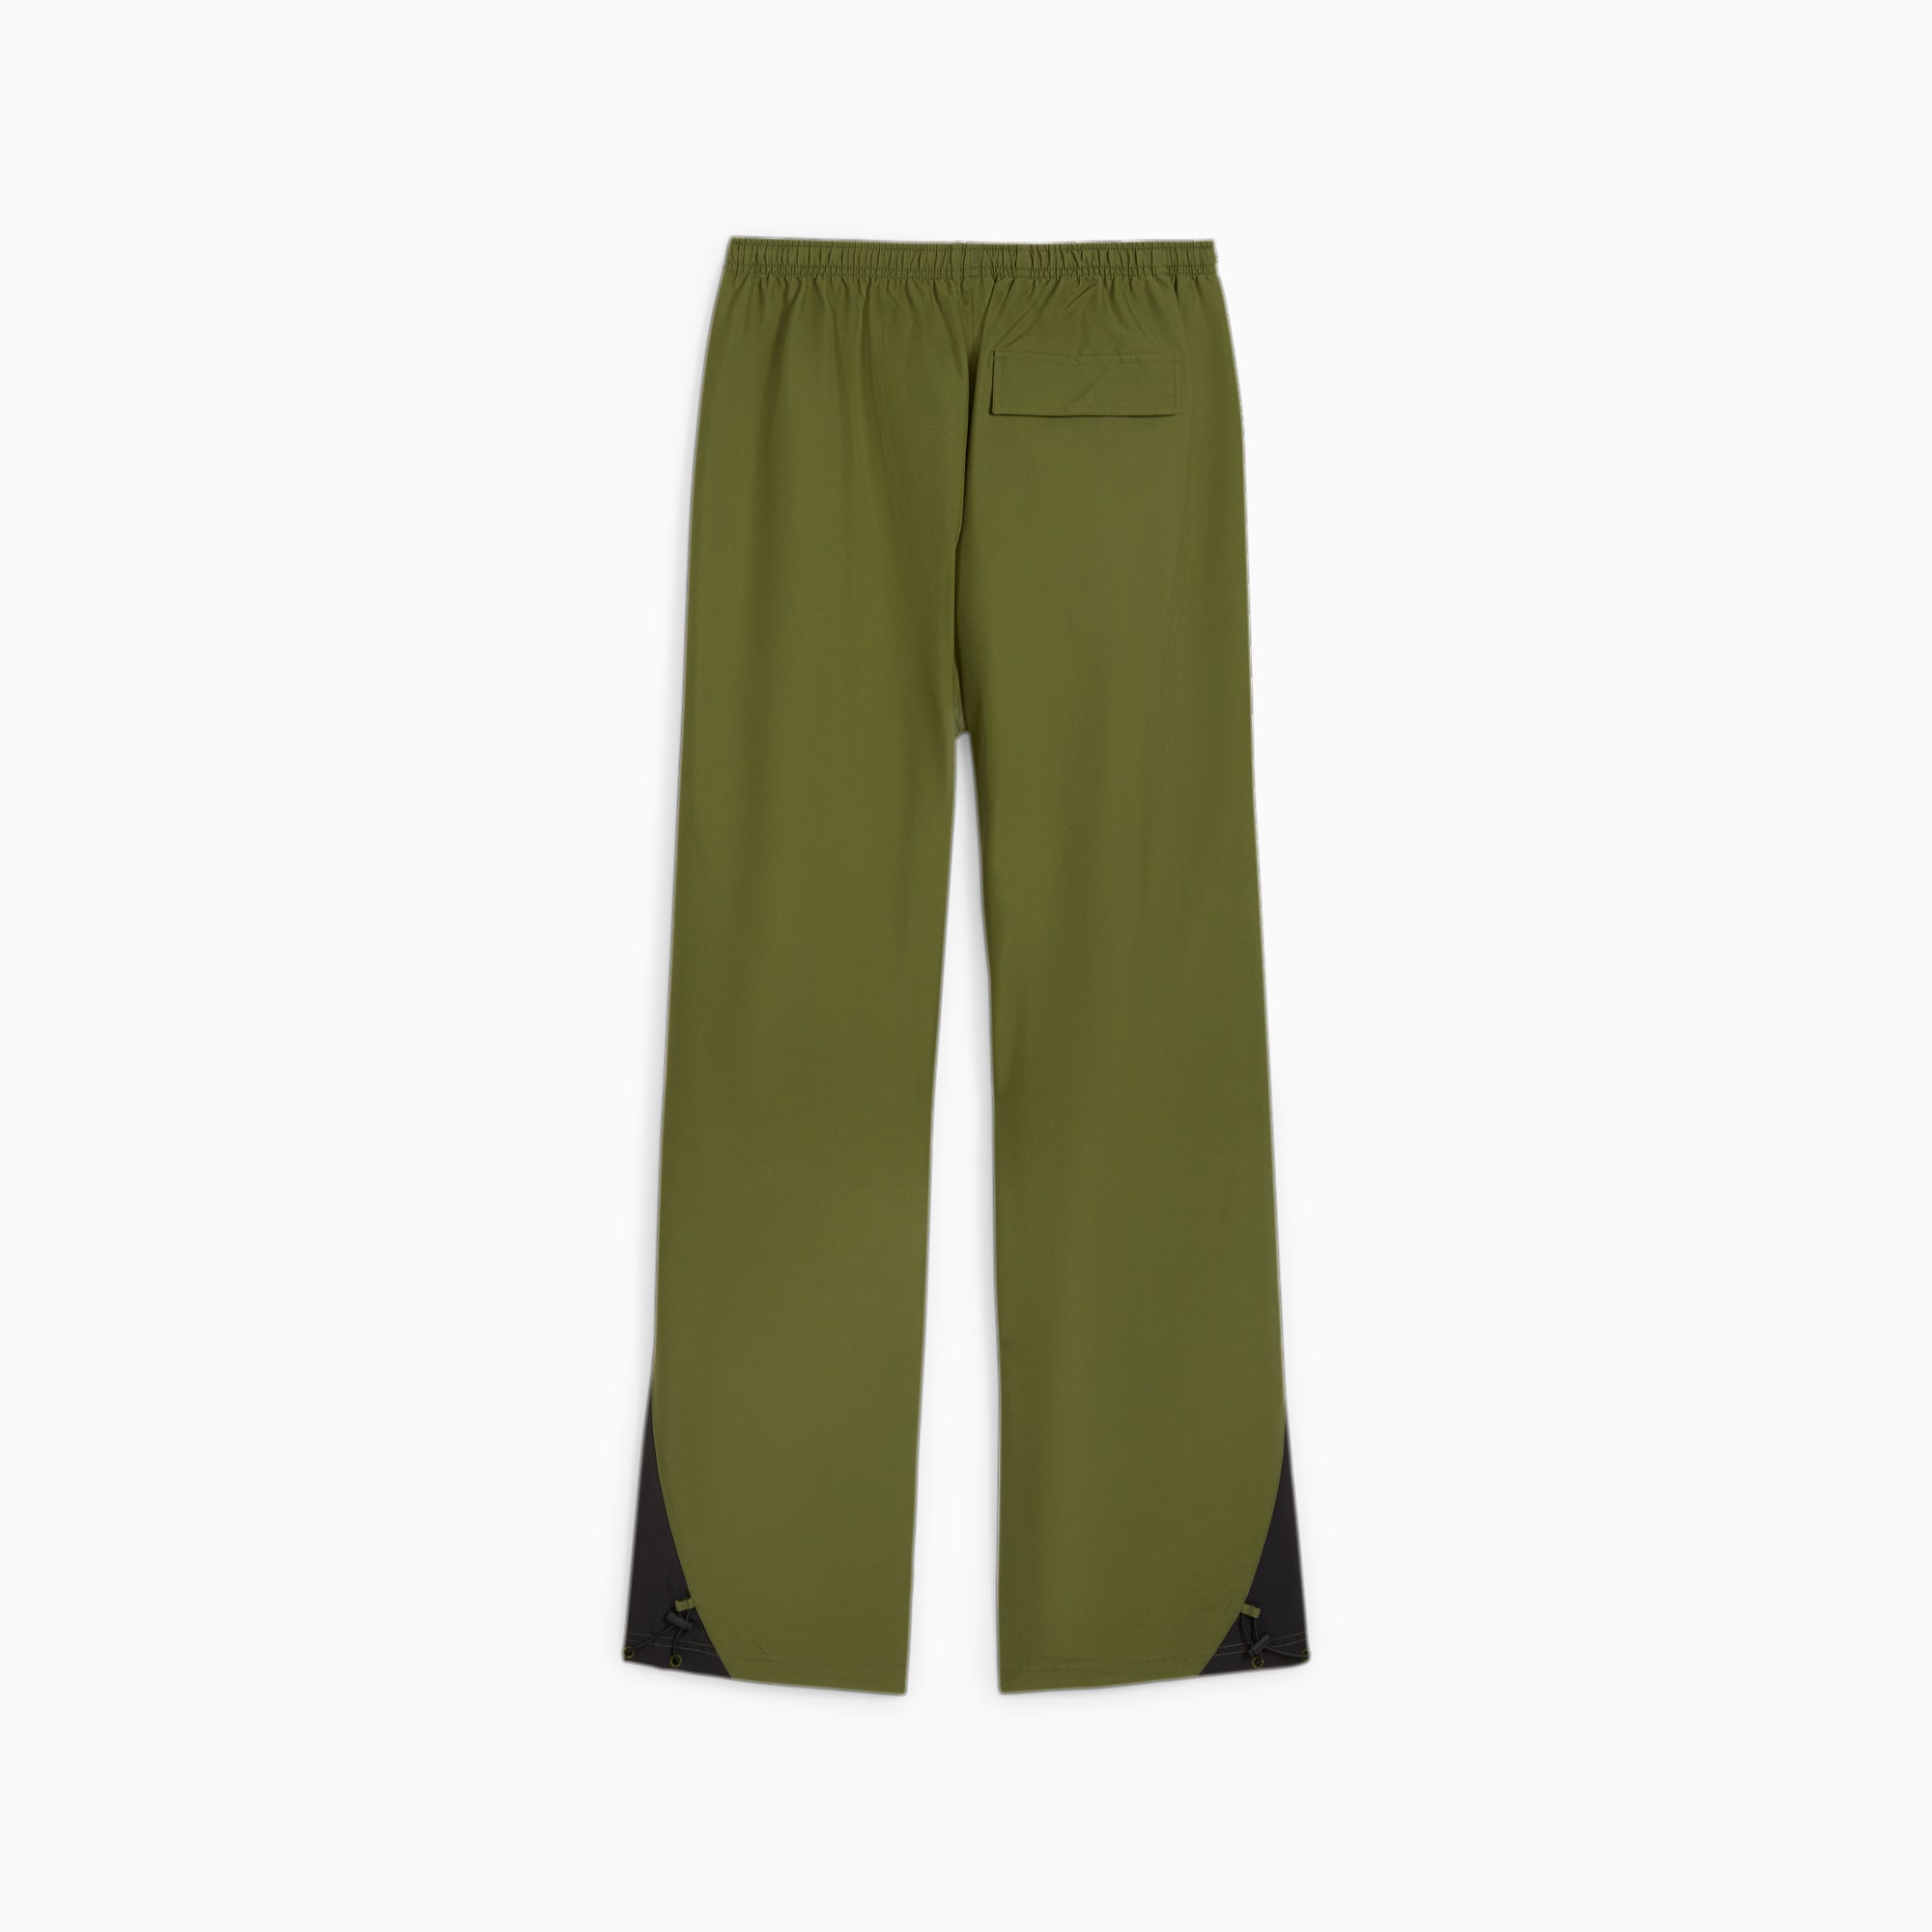 Women's PUMA Dare To Parachute Pants, Olive Green, Size S, Clothing